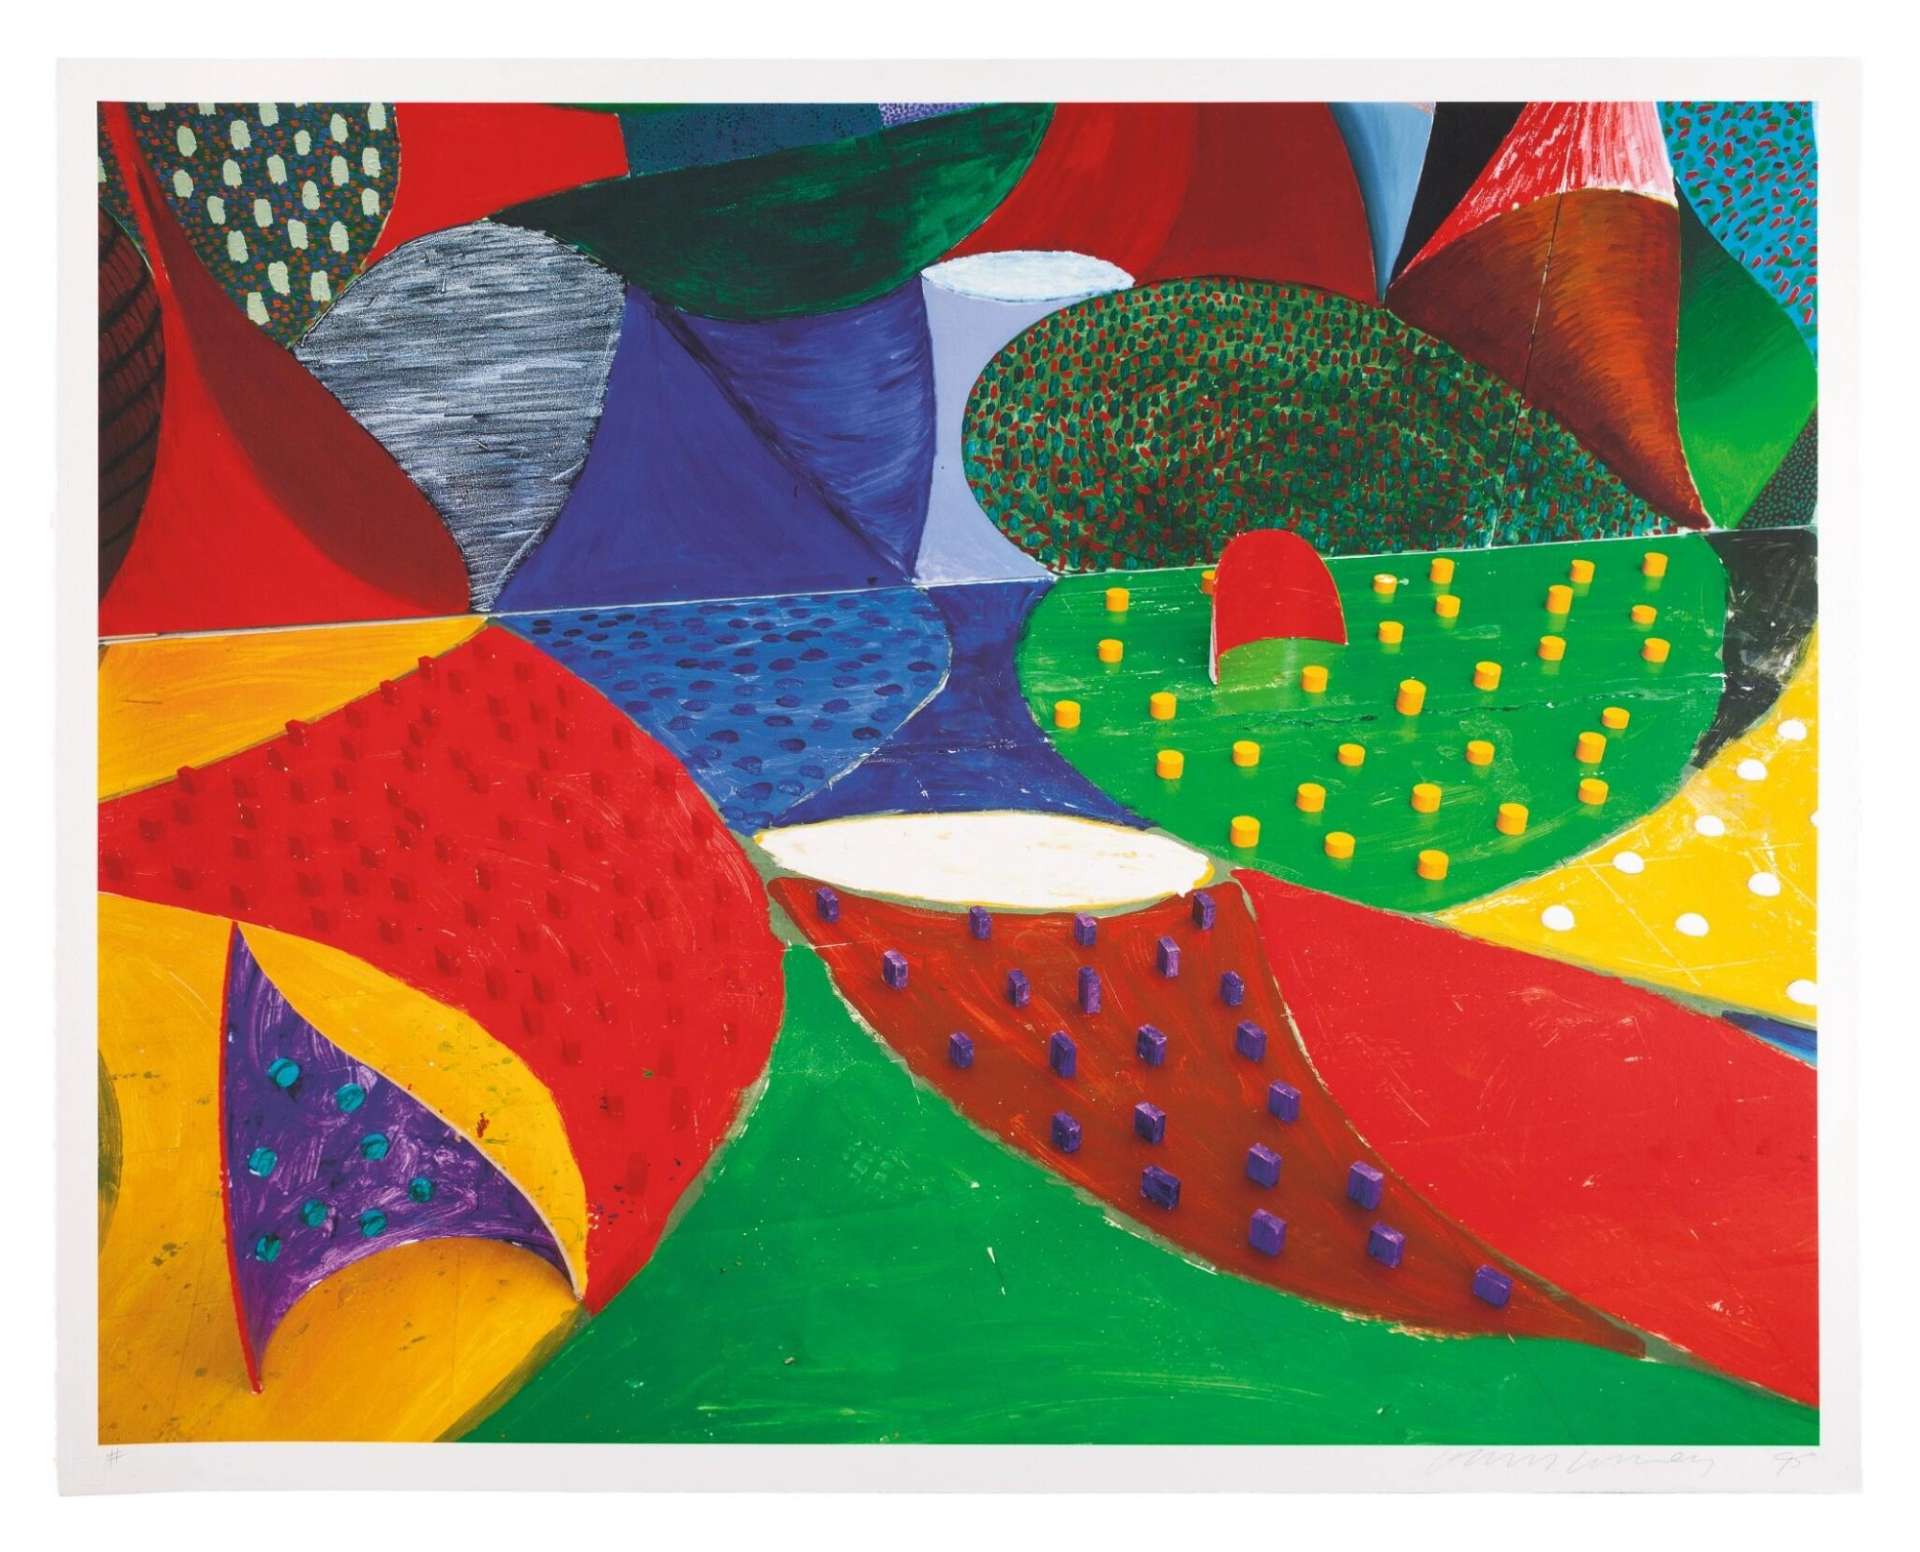 Fifth Detail, Snails Space, March 27th 1995 - Signed Print by David Hockney 1995 - MyArtBroker